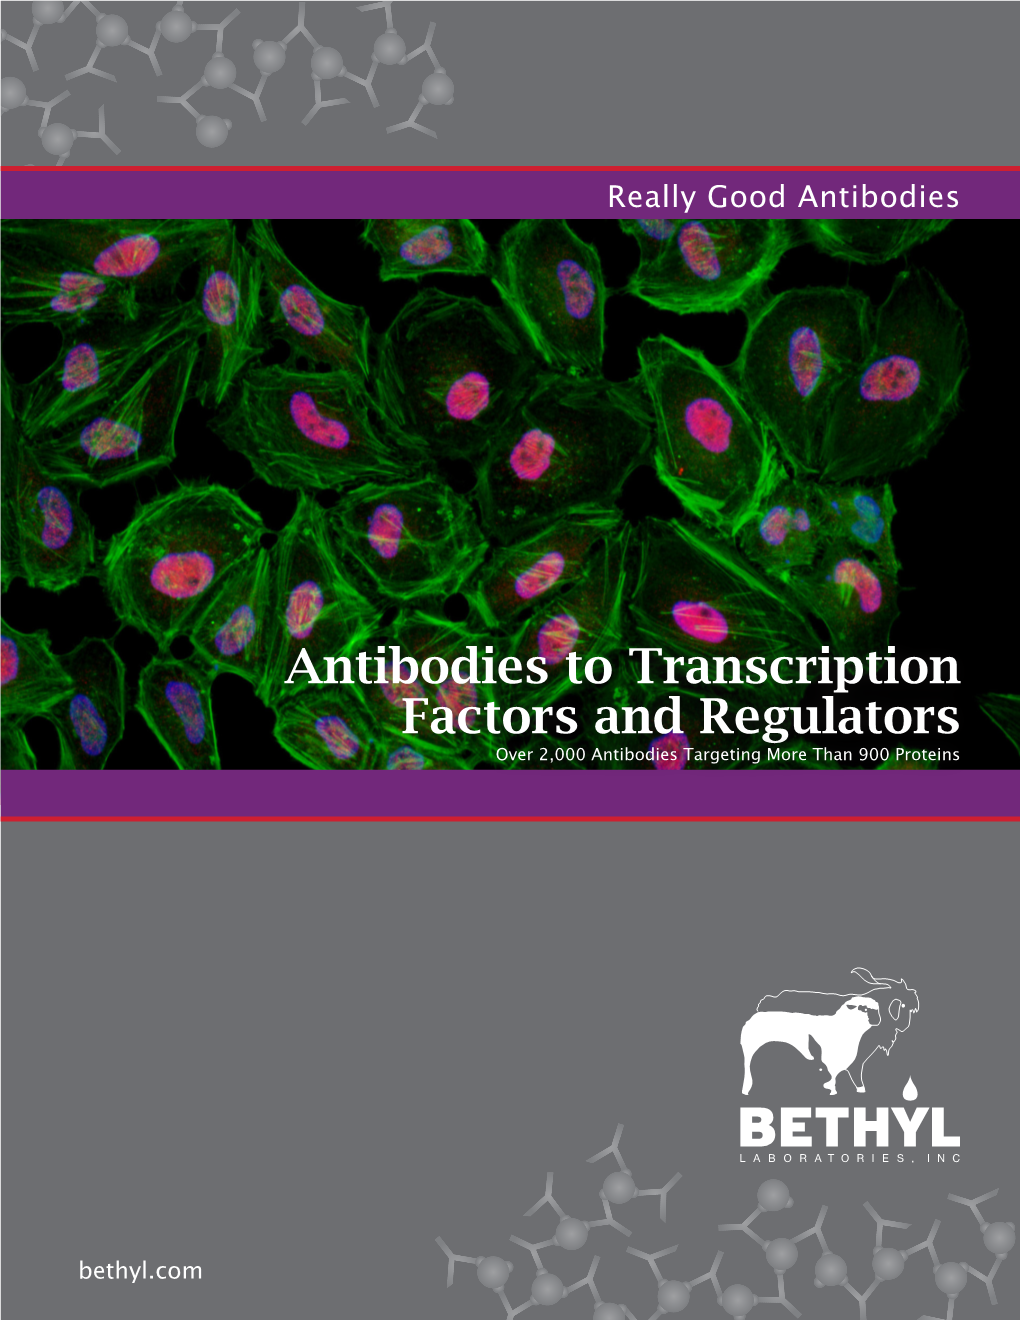 Antibodies to Transcription Factors and Regulators Over 2,000 Antibodies Targeting More Than 900 Proteins